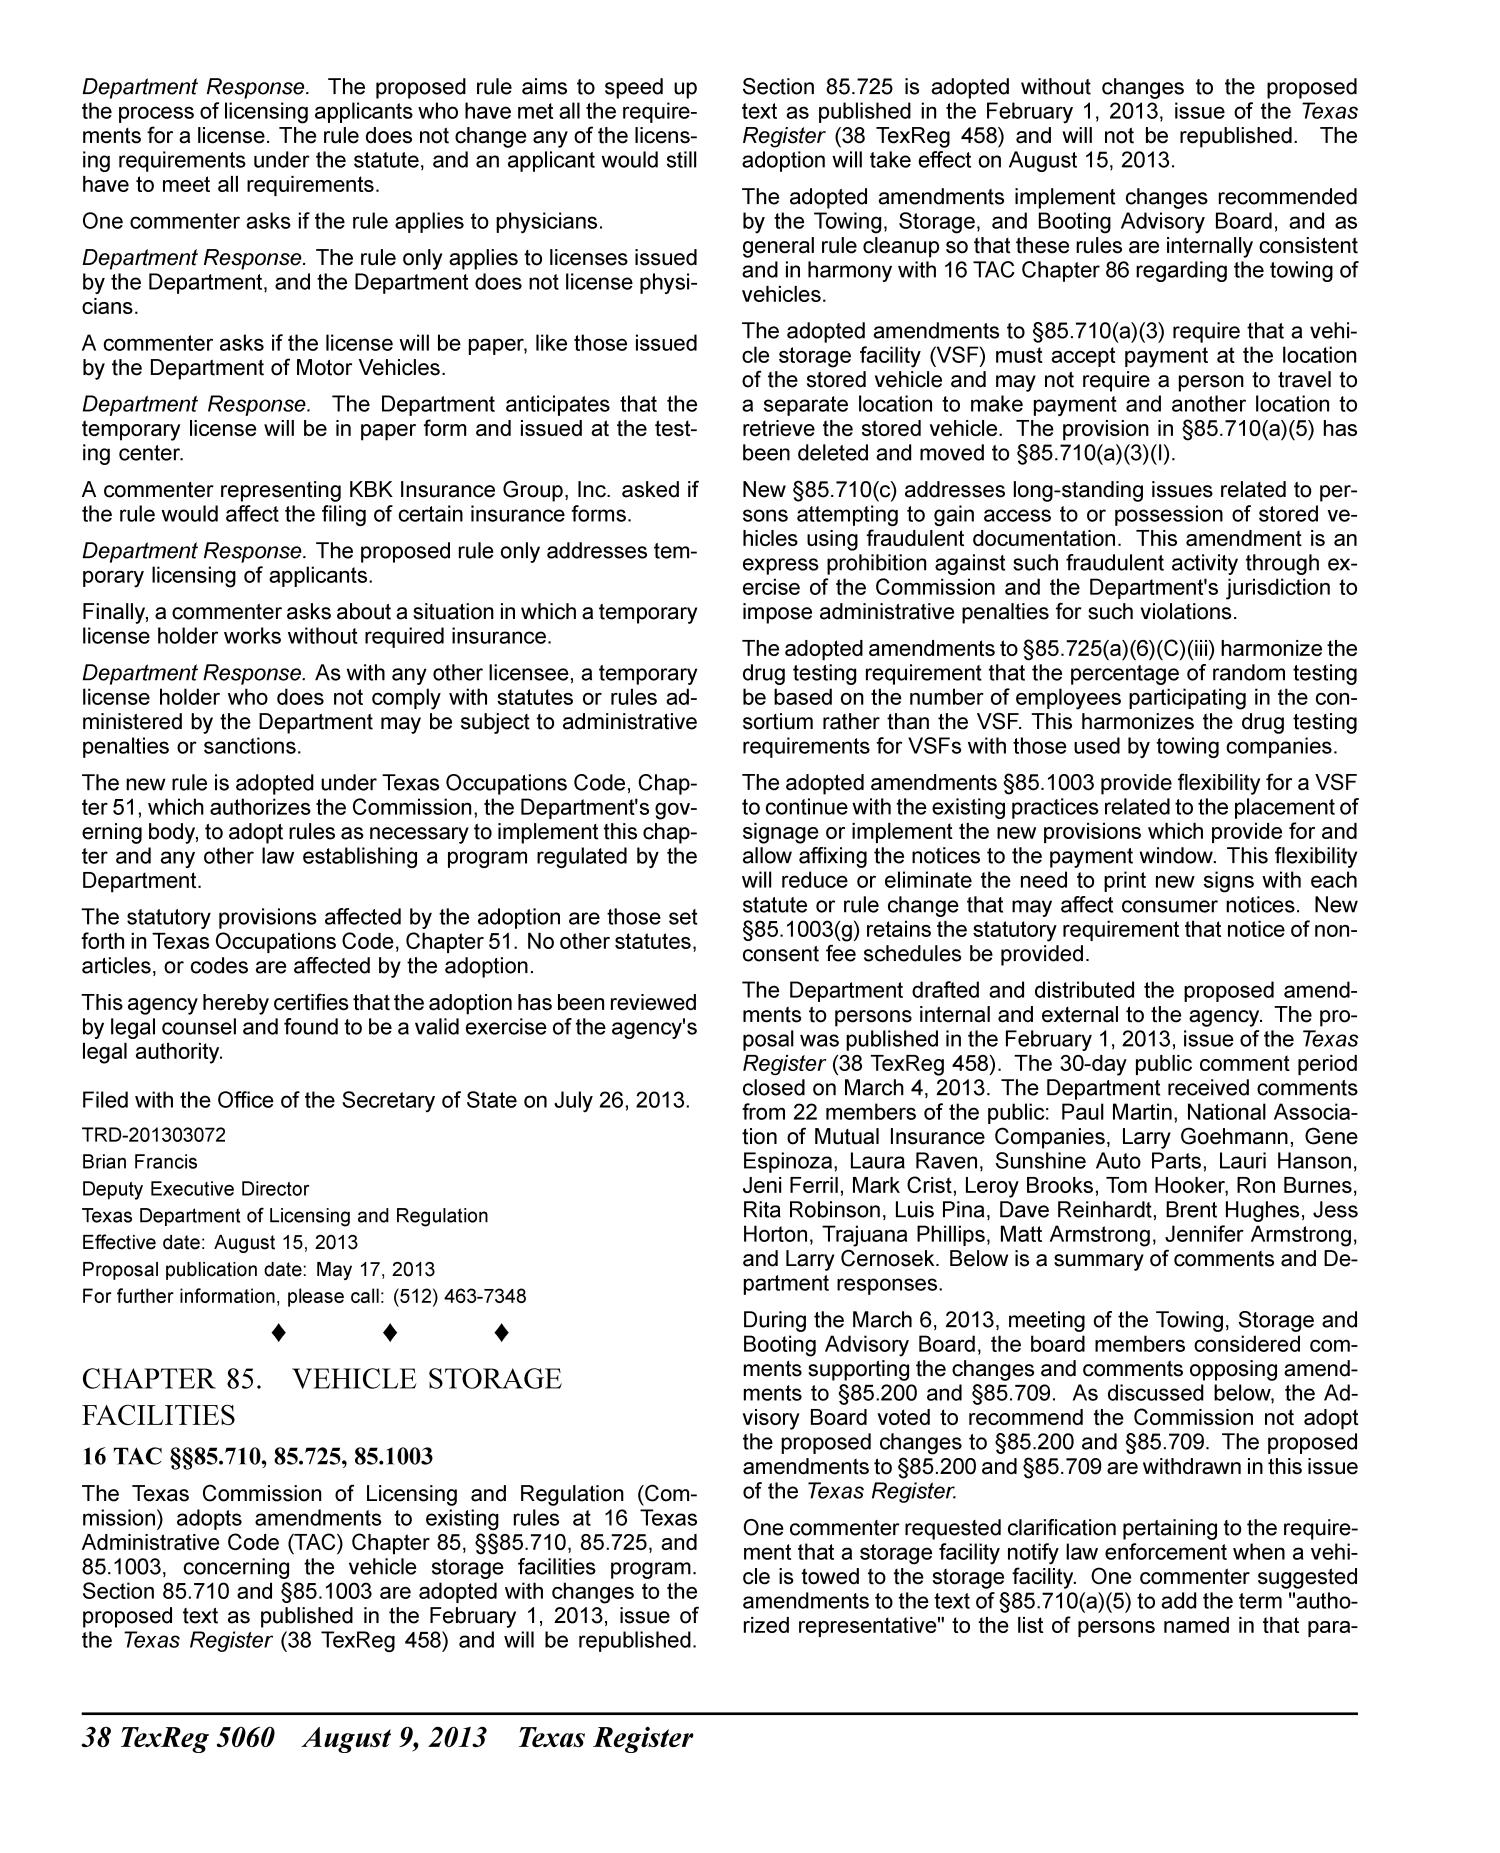 Texas Register, Volume 38, Number 32, Pages 4957-5134, August 9, 2013
                                                
                                                    5060
                                                